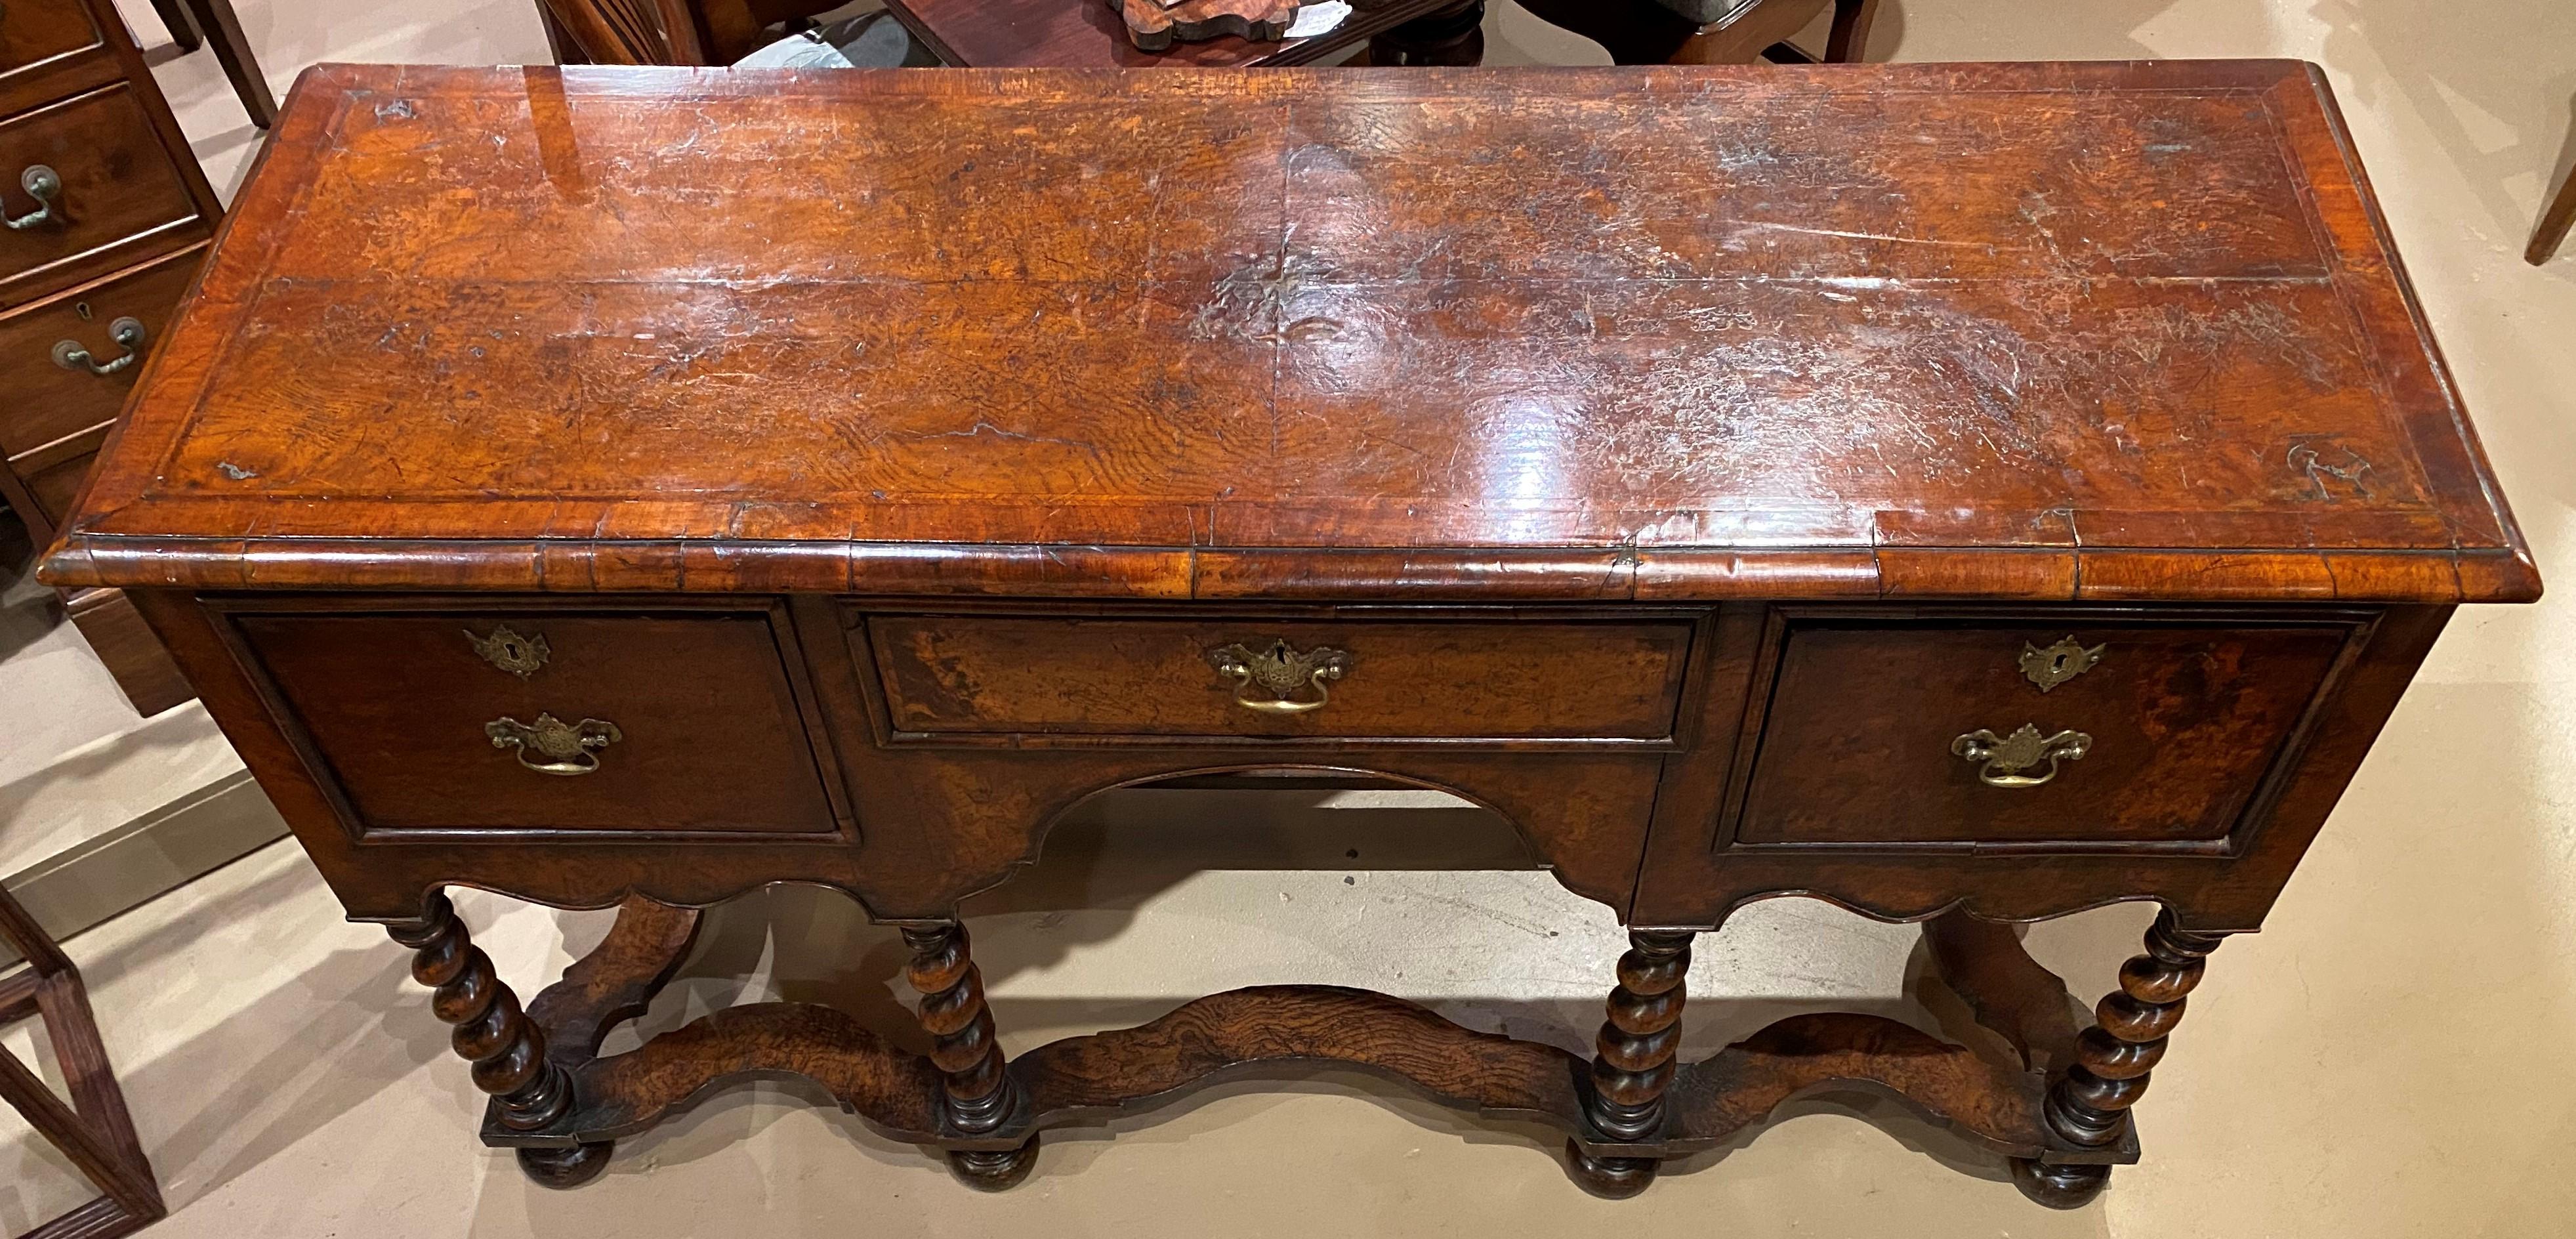 A finely carved burled walnut sideboard or server with rectangular top featuring cross-banded veneer molded edge border surmounting a center frieze drawer flanked by two fitted deep drawers, each featuring decorative brasses, all supported by six